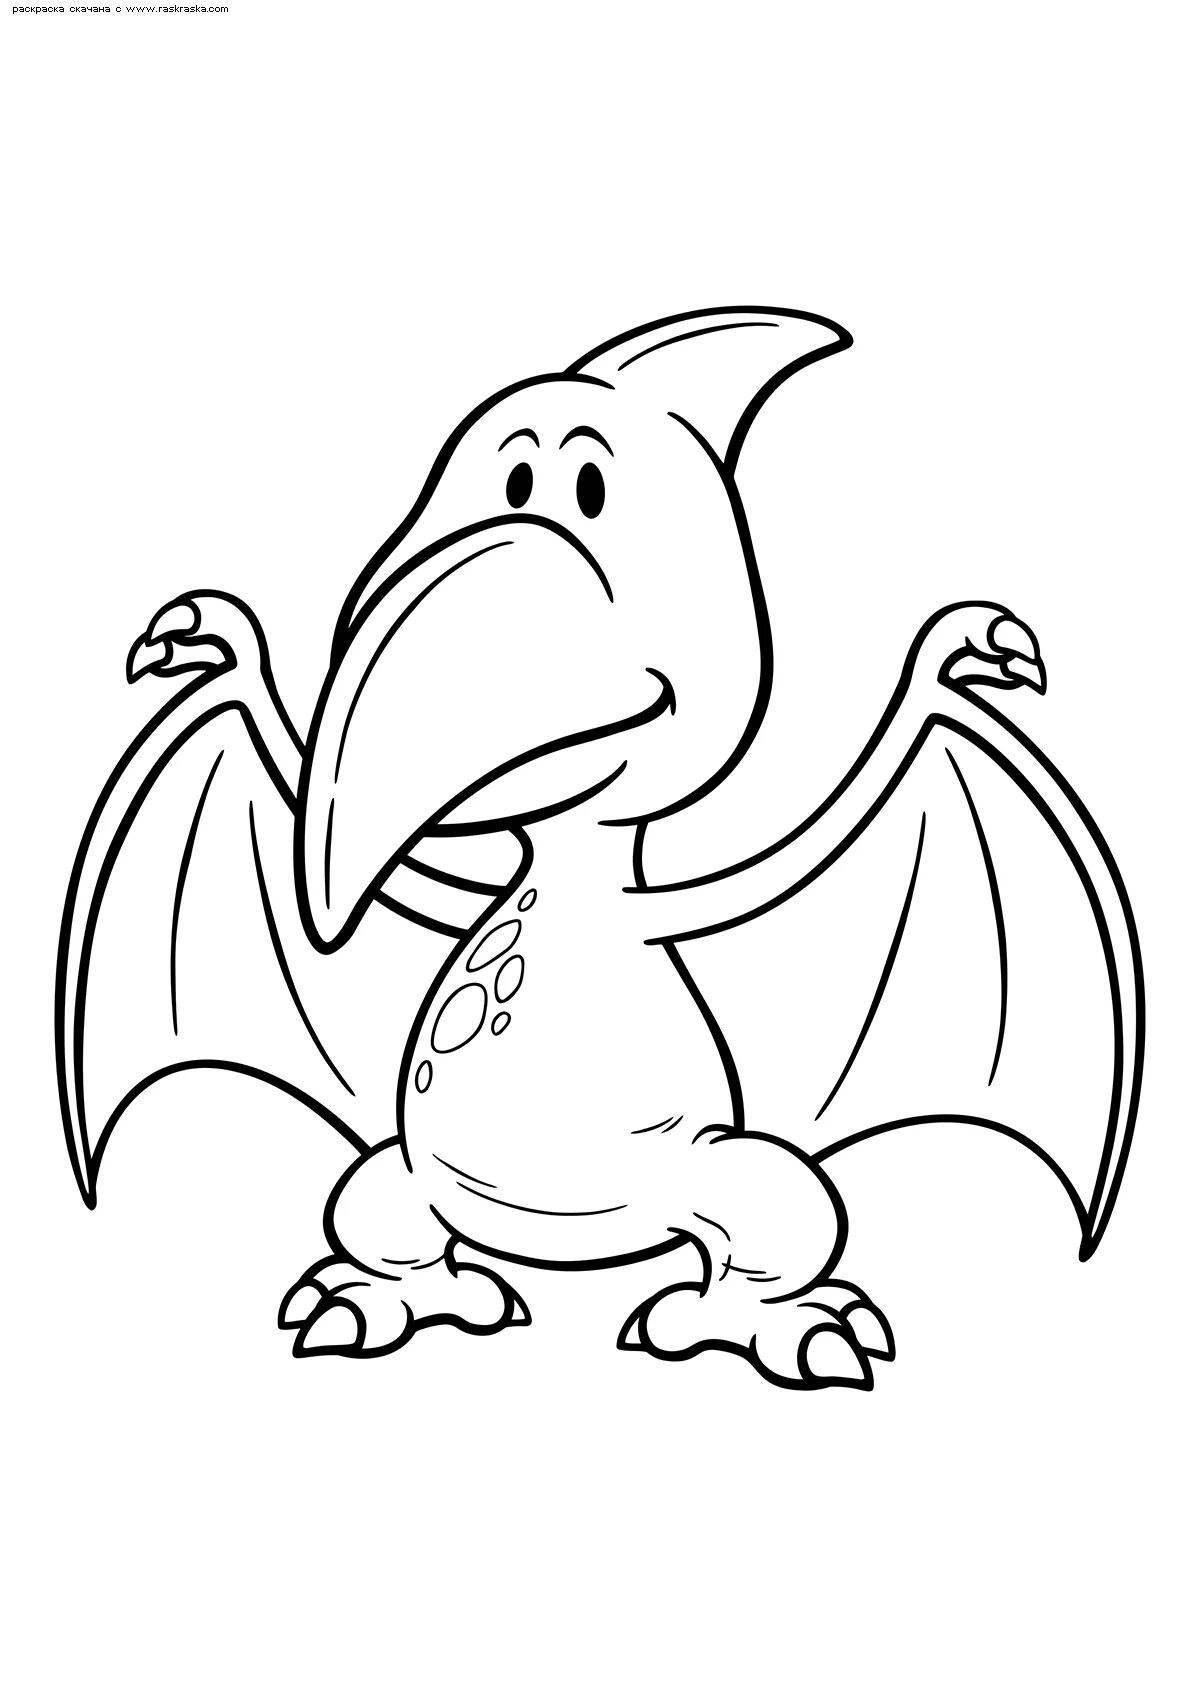 Pterodactyl fun coloring book for kids